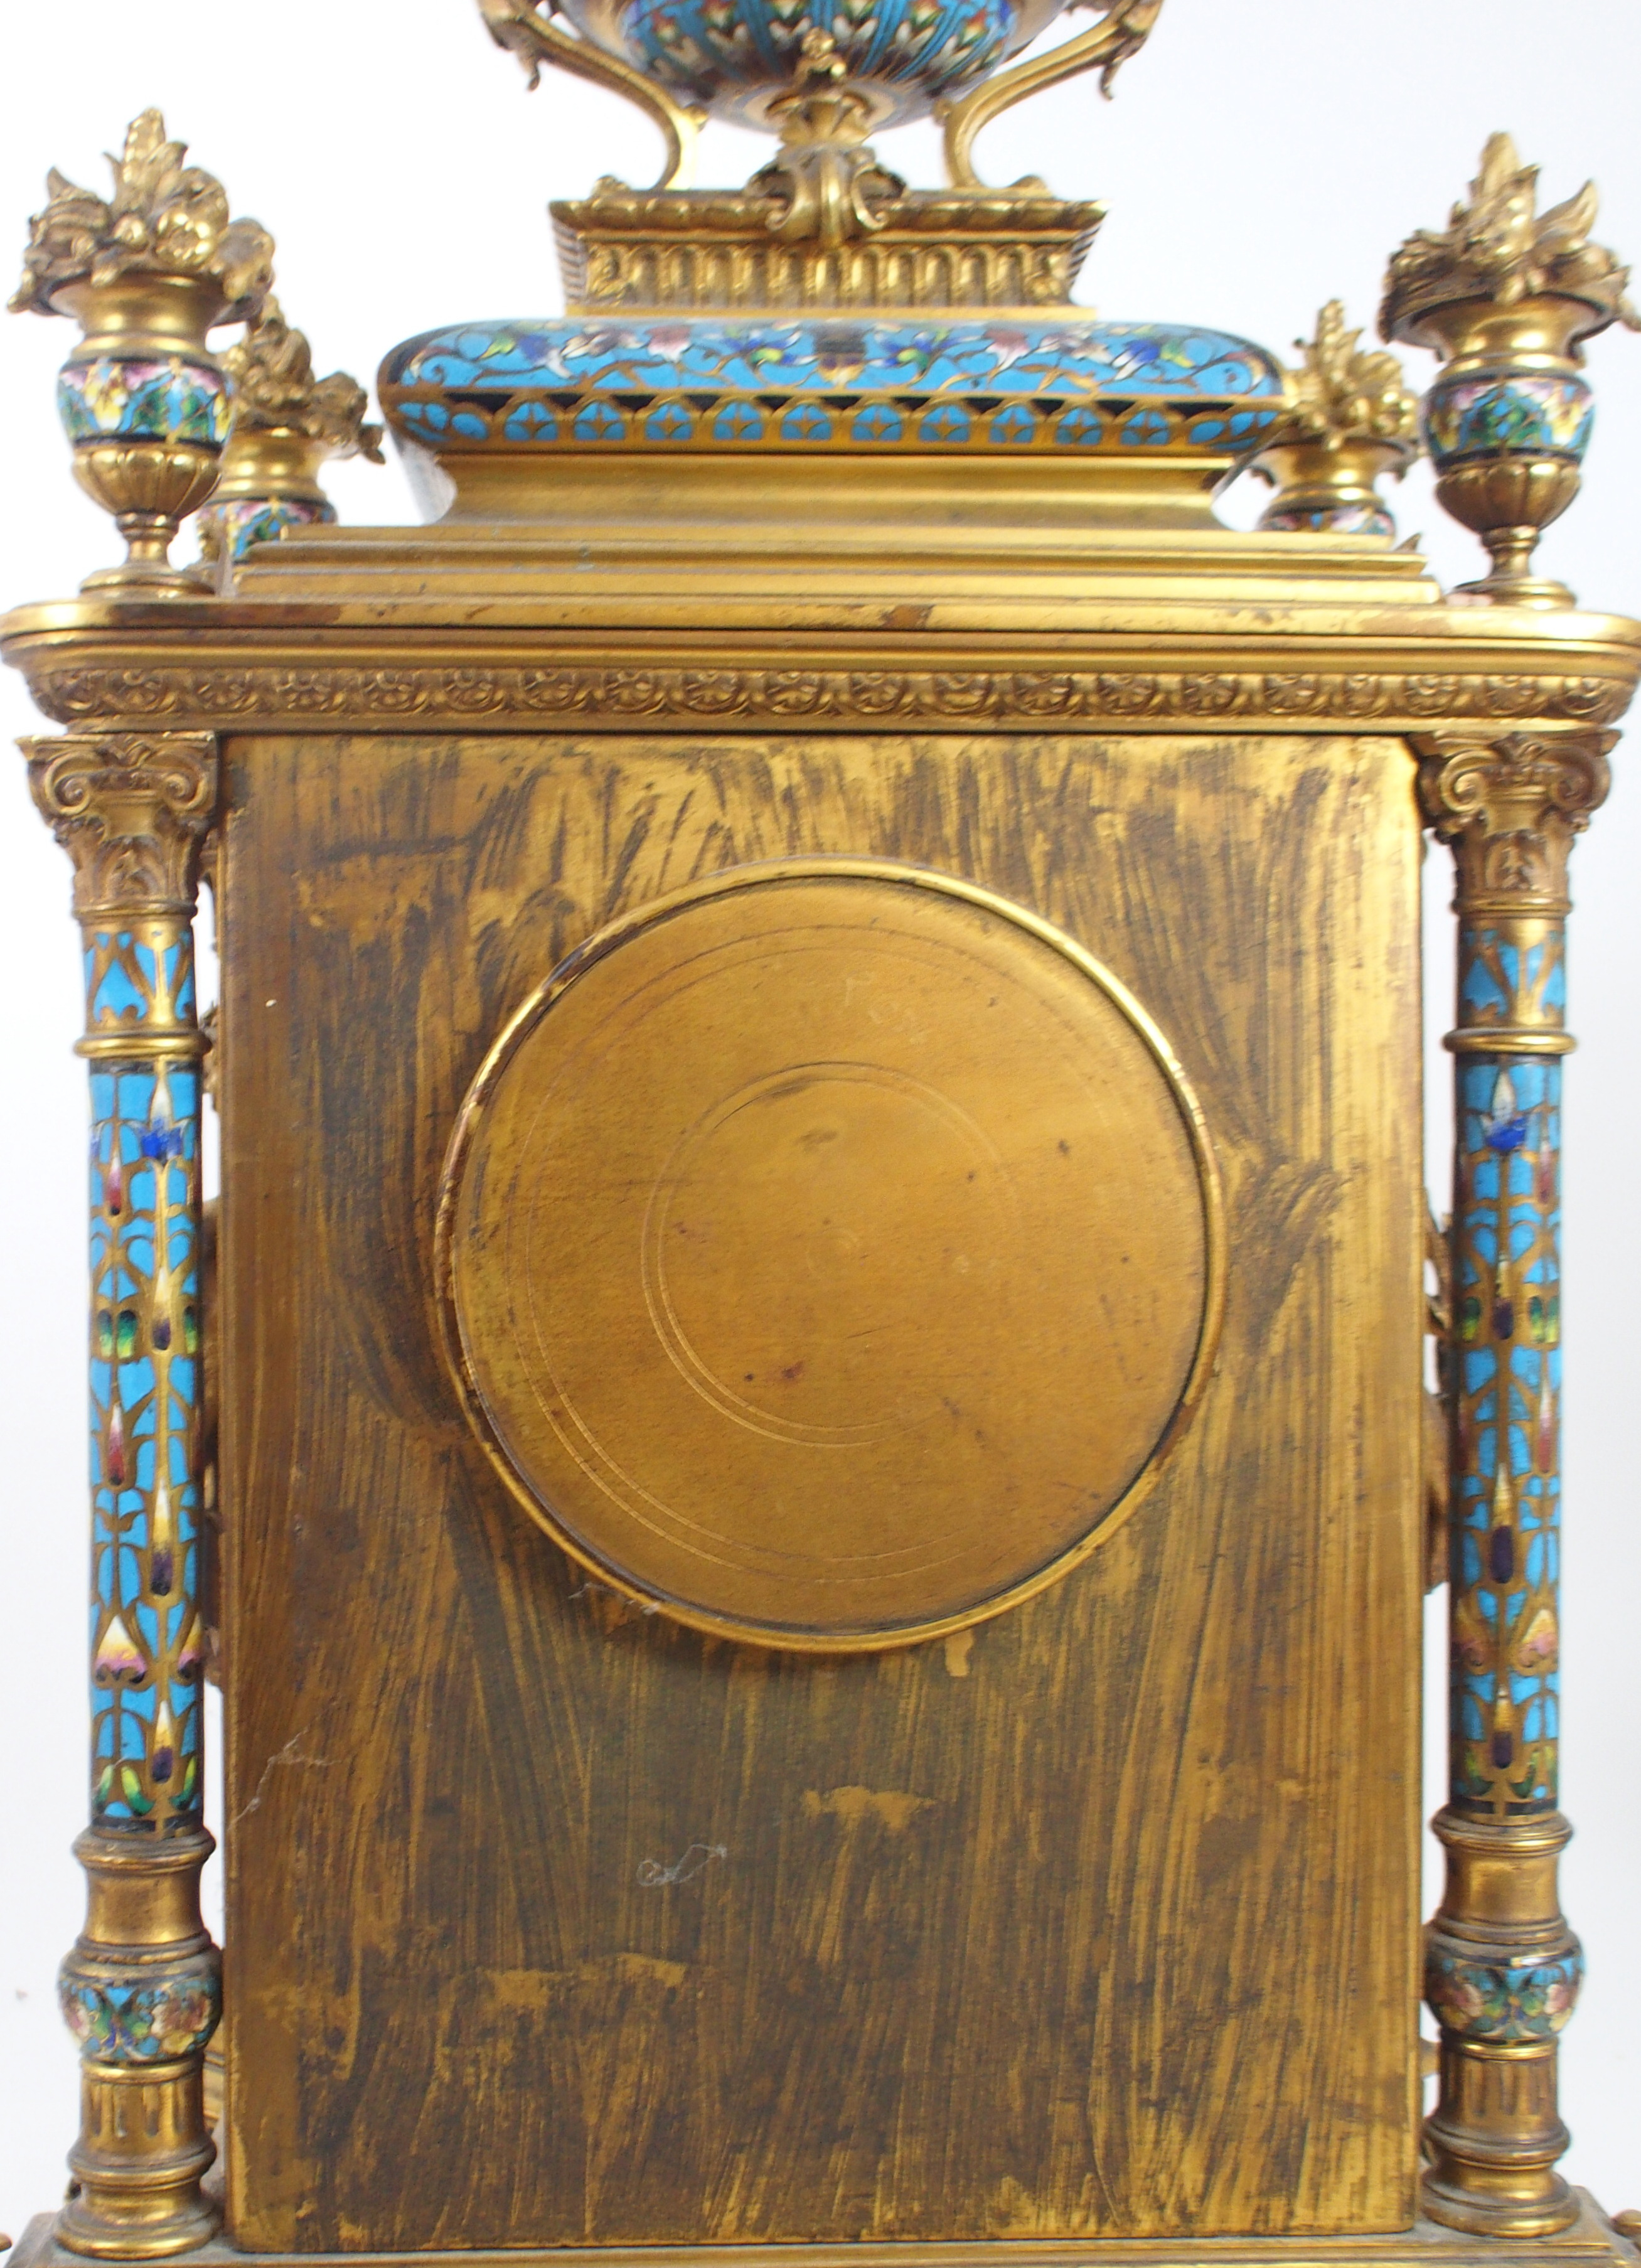 AN IMPRESSIVE 19TH CENTURY FRENCH CHAMPLEVE ENAMEL MANTLE CLOCK the urn mounted top with griffin han - Image 9 of 15